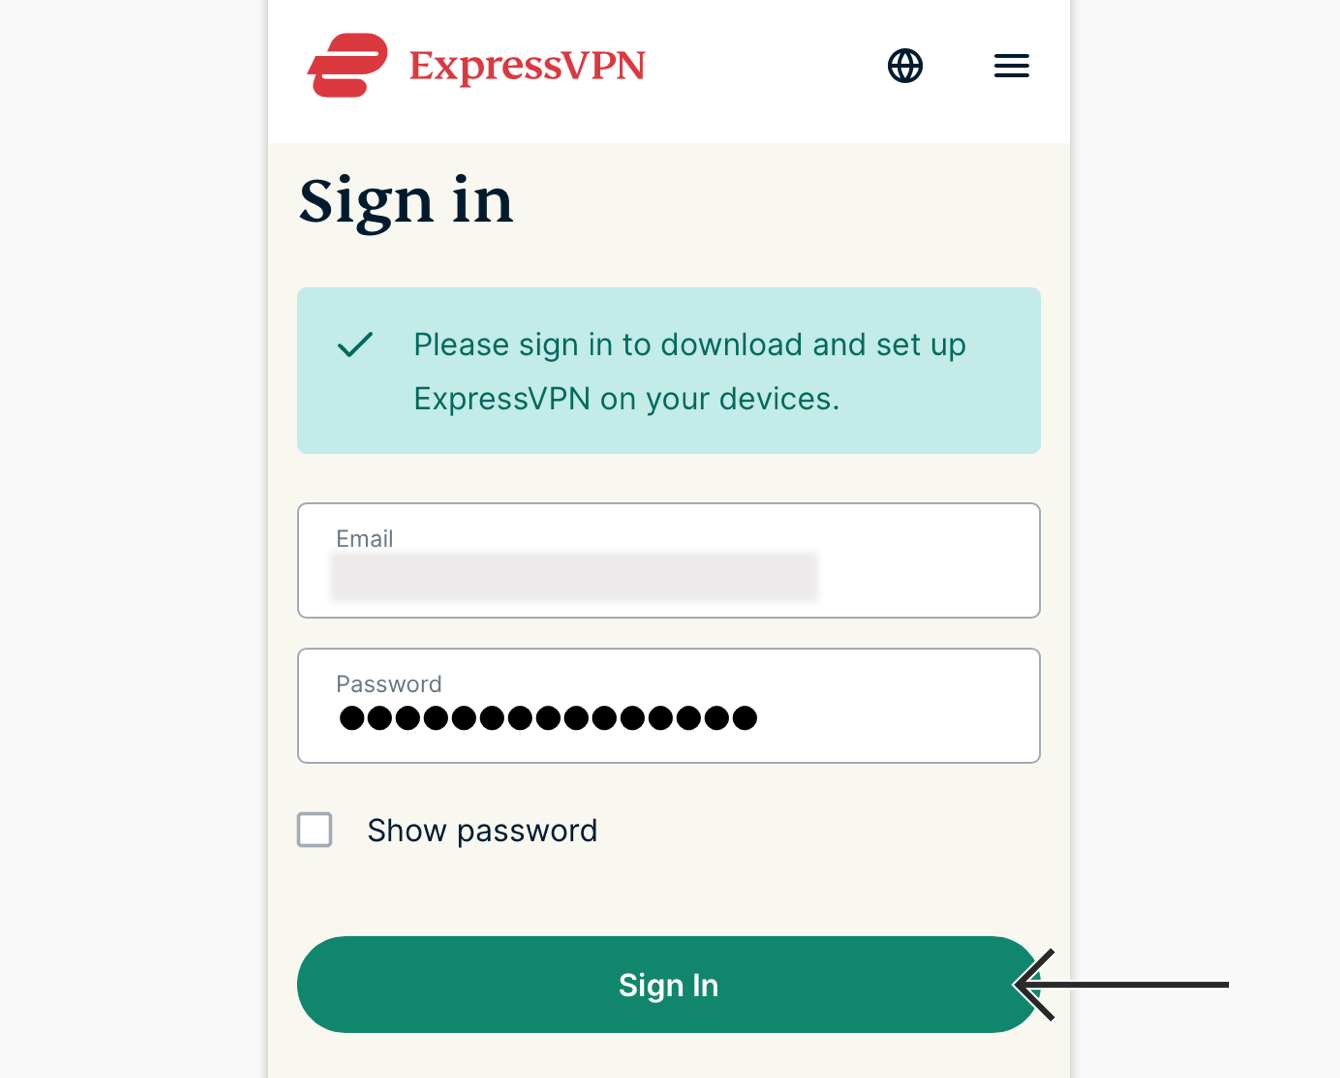 expressvpn-account-mobile-tap-sign-in-nz